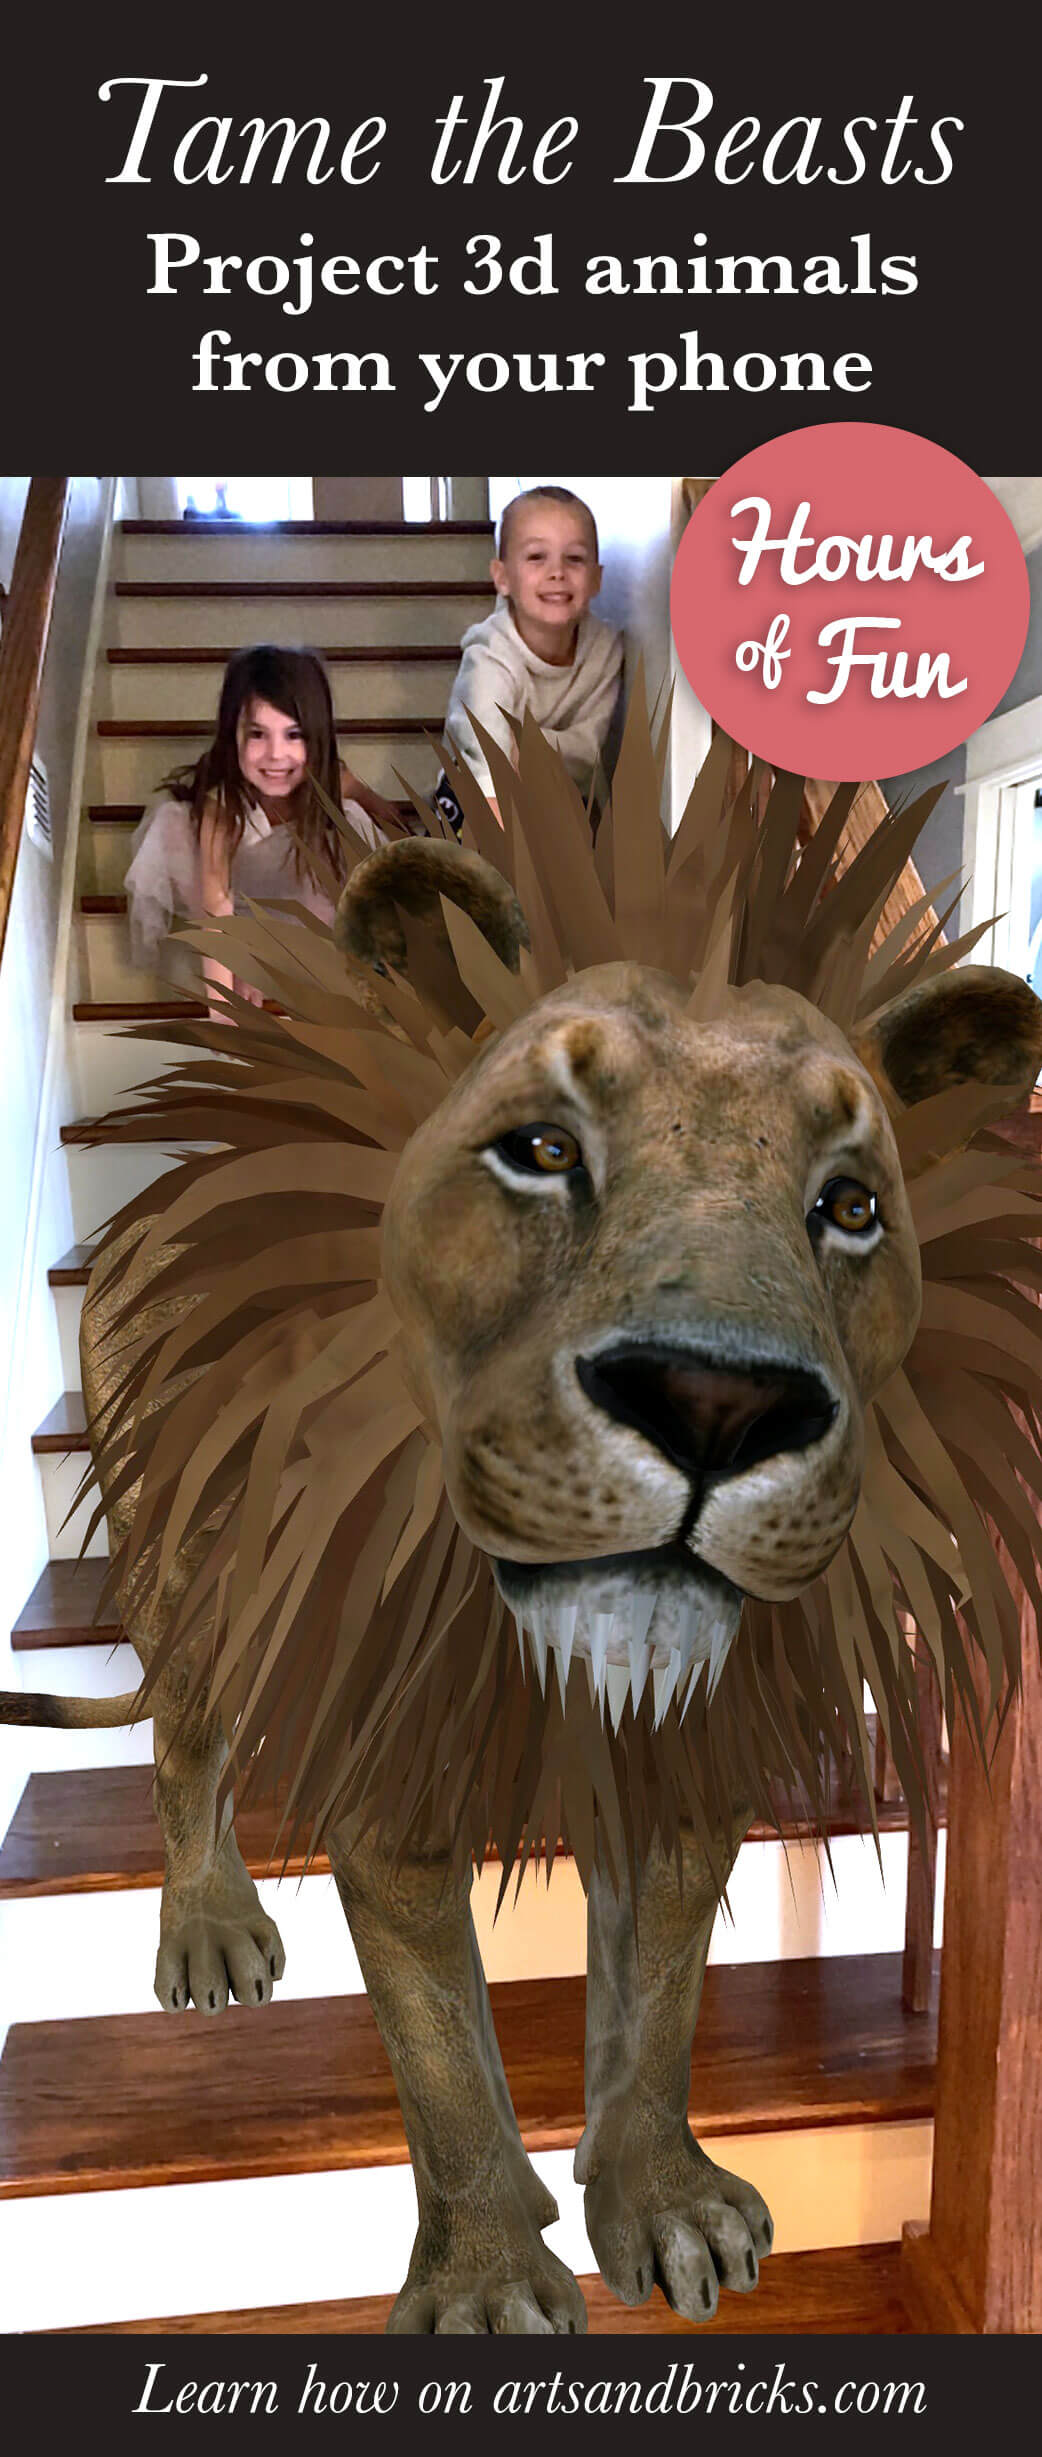 Tame the Beasts - Project 3D animals from your phone - social media trend!